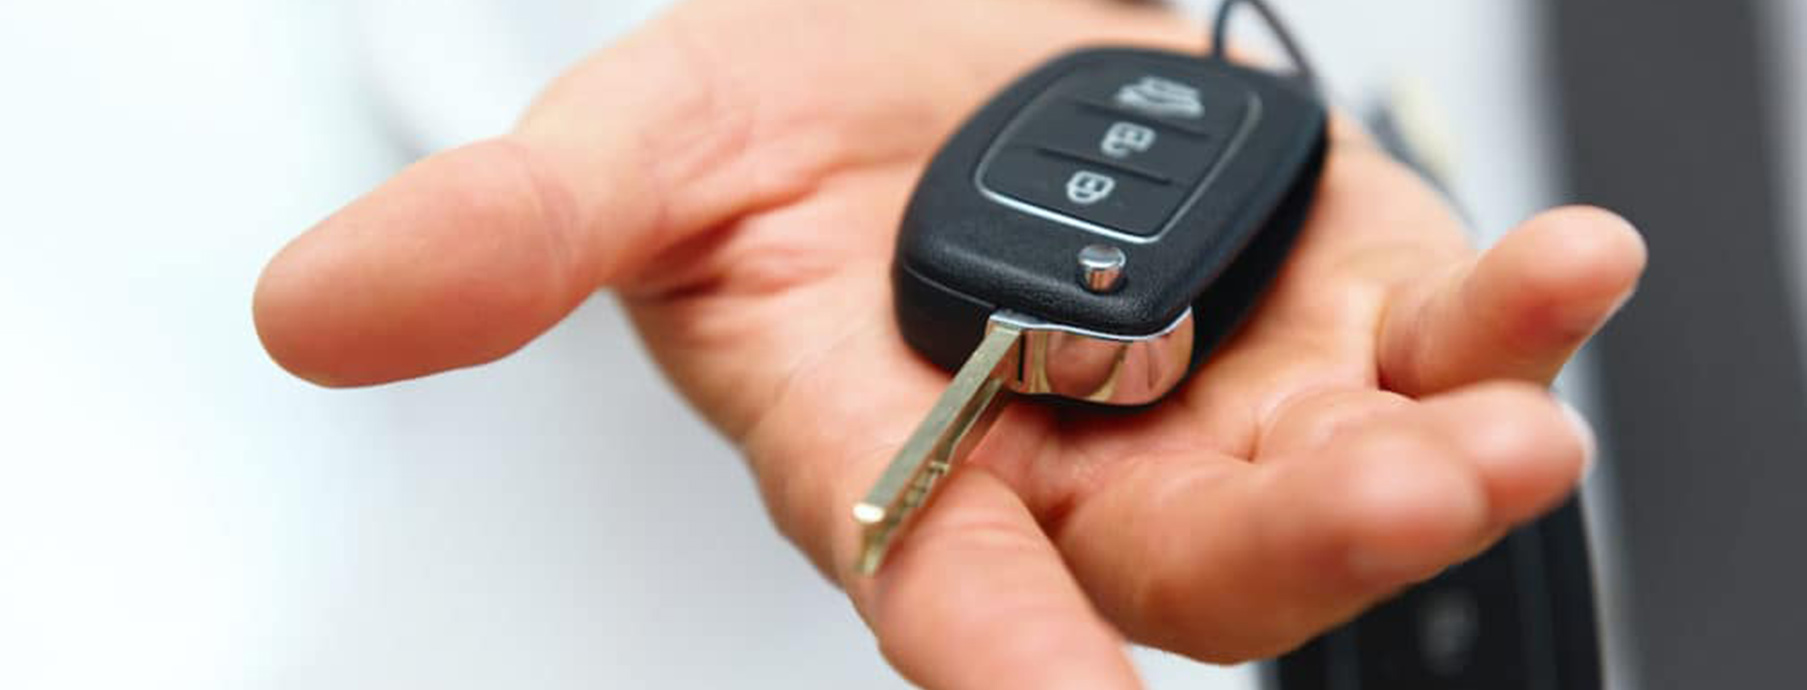 Amesbury Automotive Locksmith, Key Replacement and Car Lockout Services